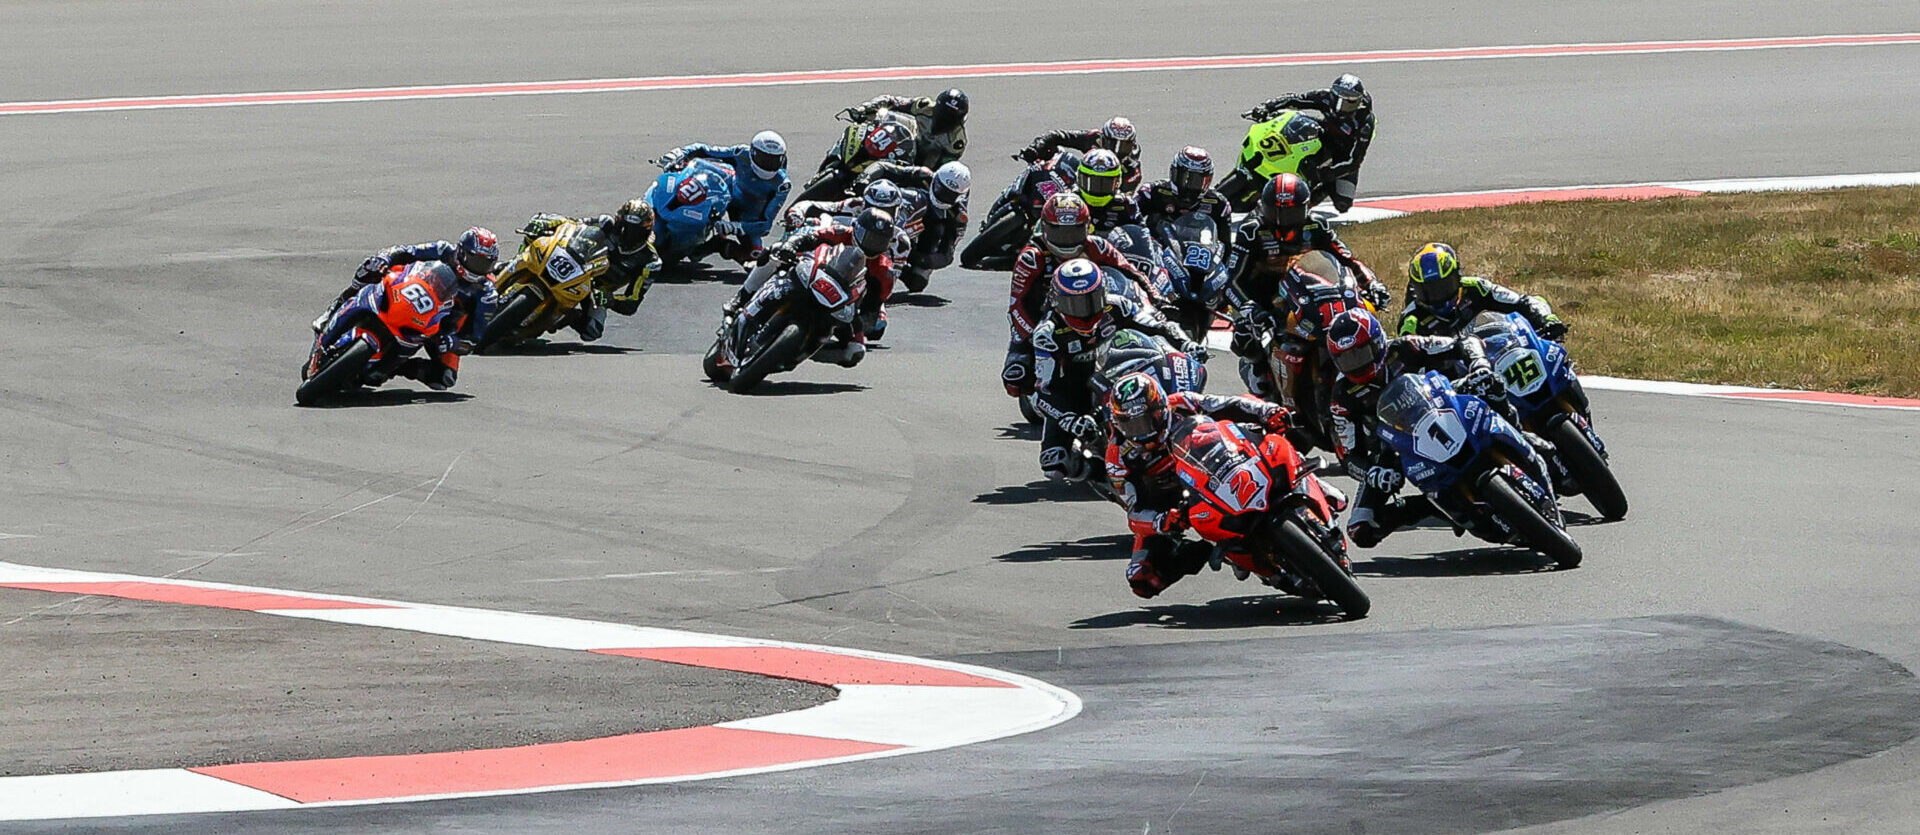 Josh Herrin (2) leads Jake Gagne (1), Cameron Petersen (45), Cameron Beaubier (hidden) and the rest of the Medallia Superbike pack at Ridge Motorsports Park on Saturday. Photo by Brian J. Nelson.